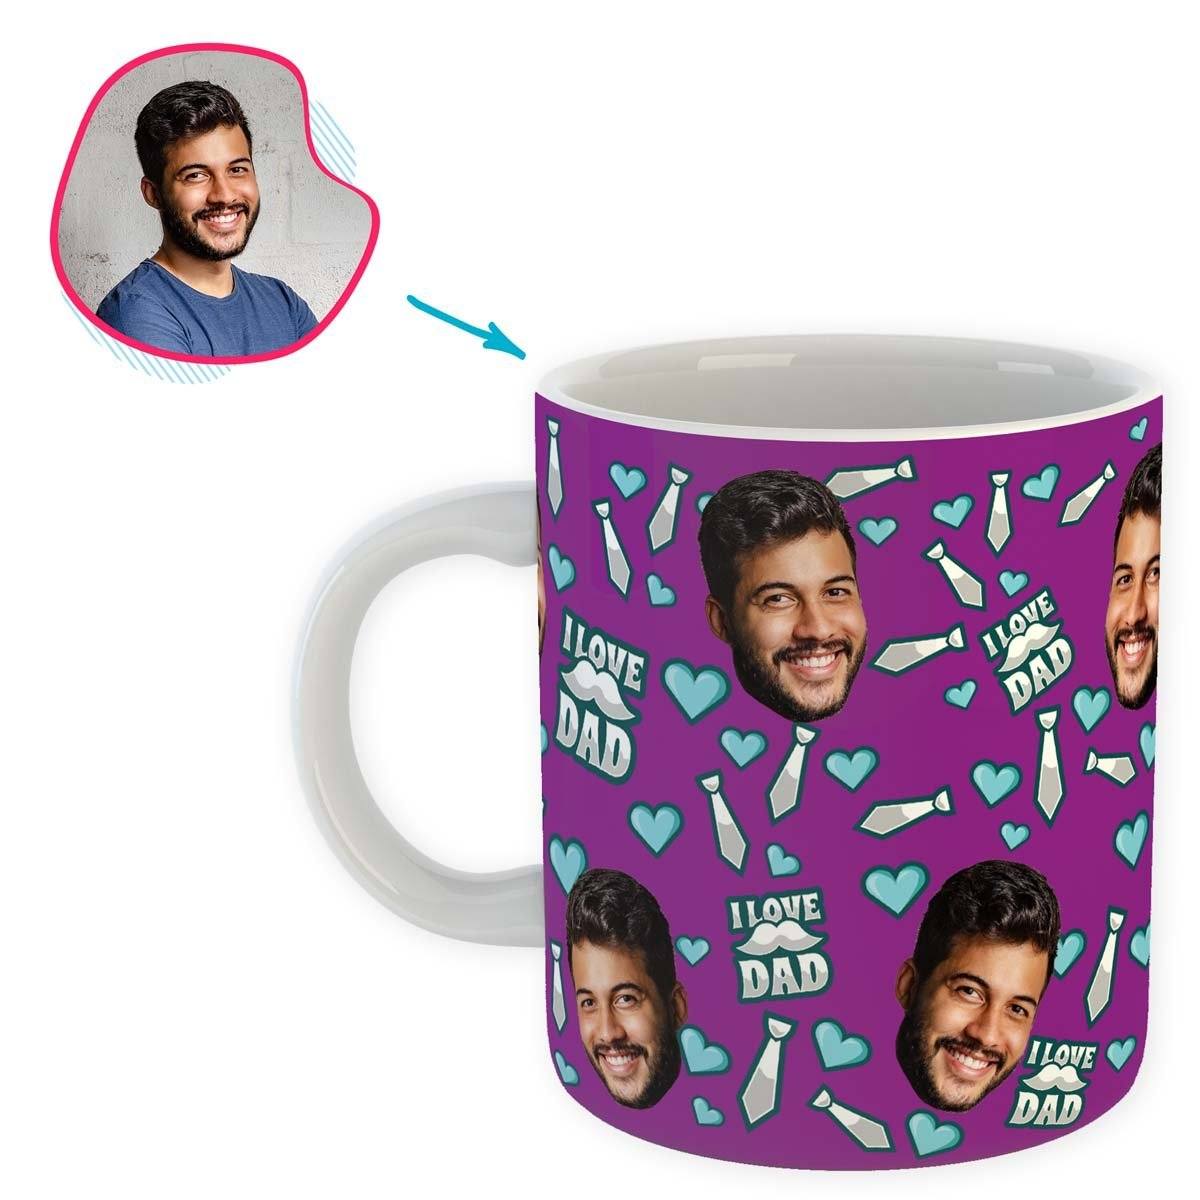 purple Love Dad mug personalized with photo of face printed on it